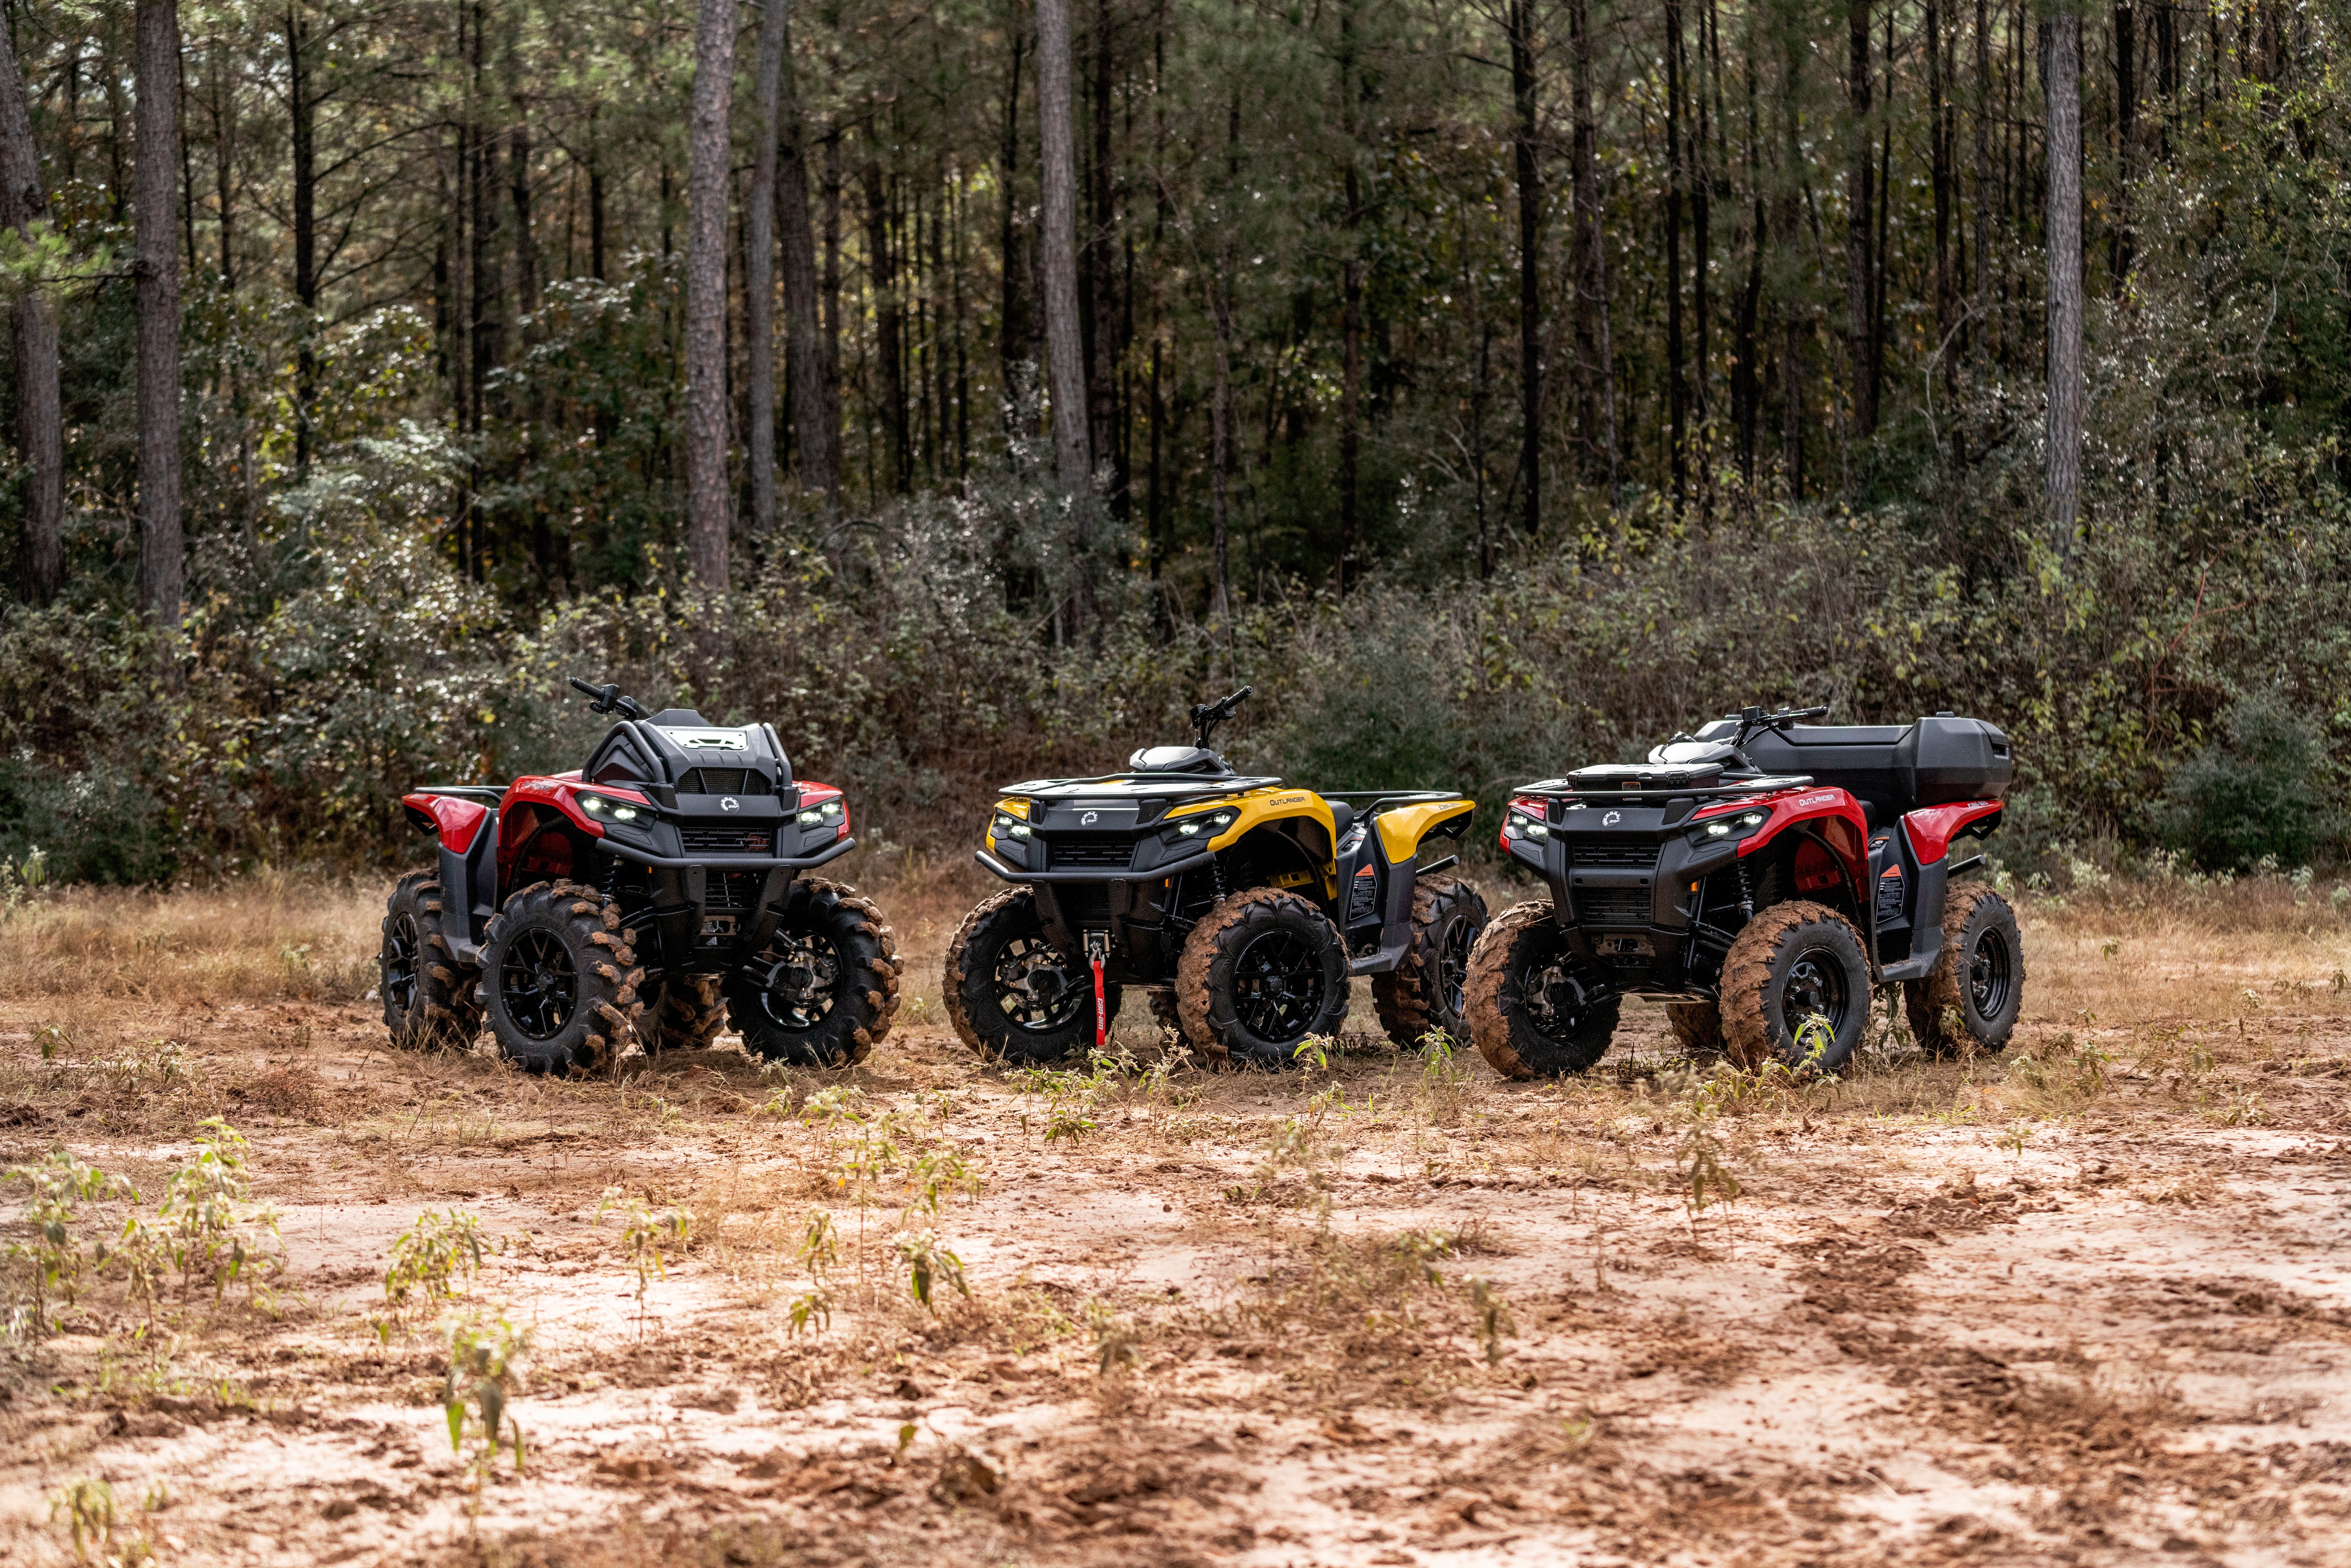 Family shot of three Can-Am Outlander in front of the forest